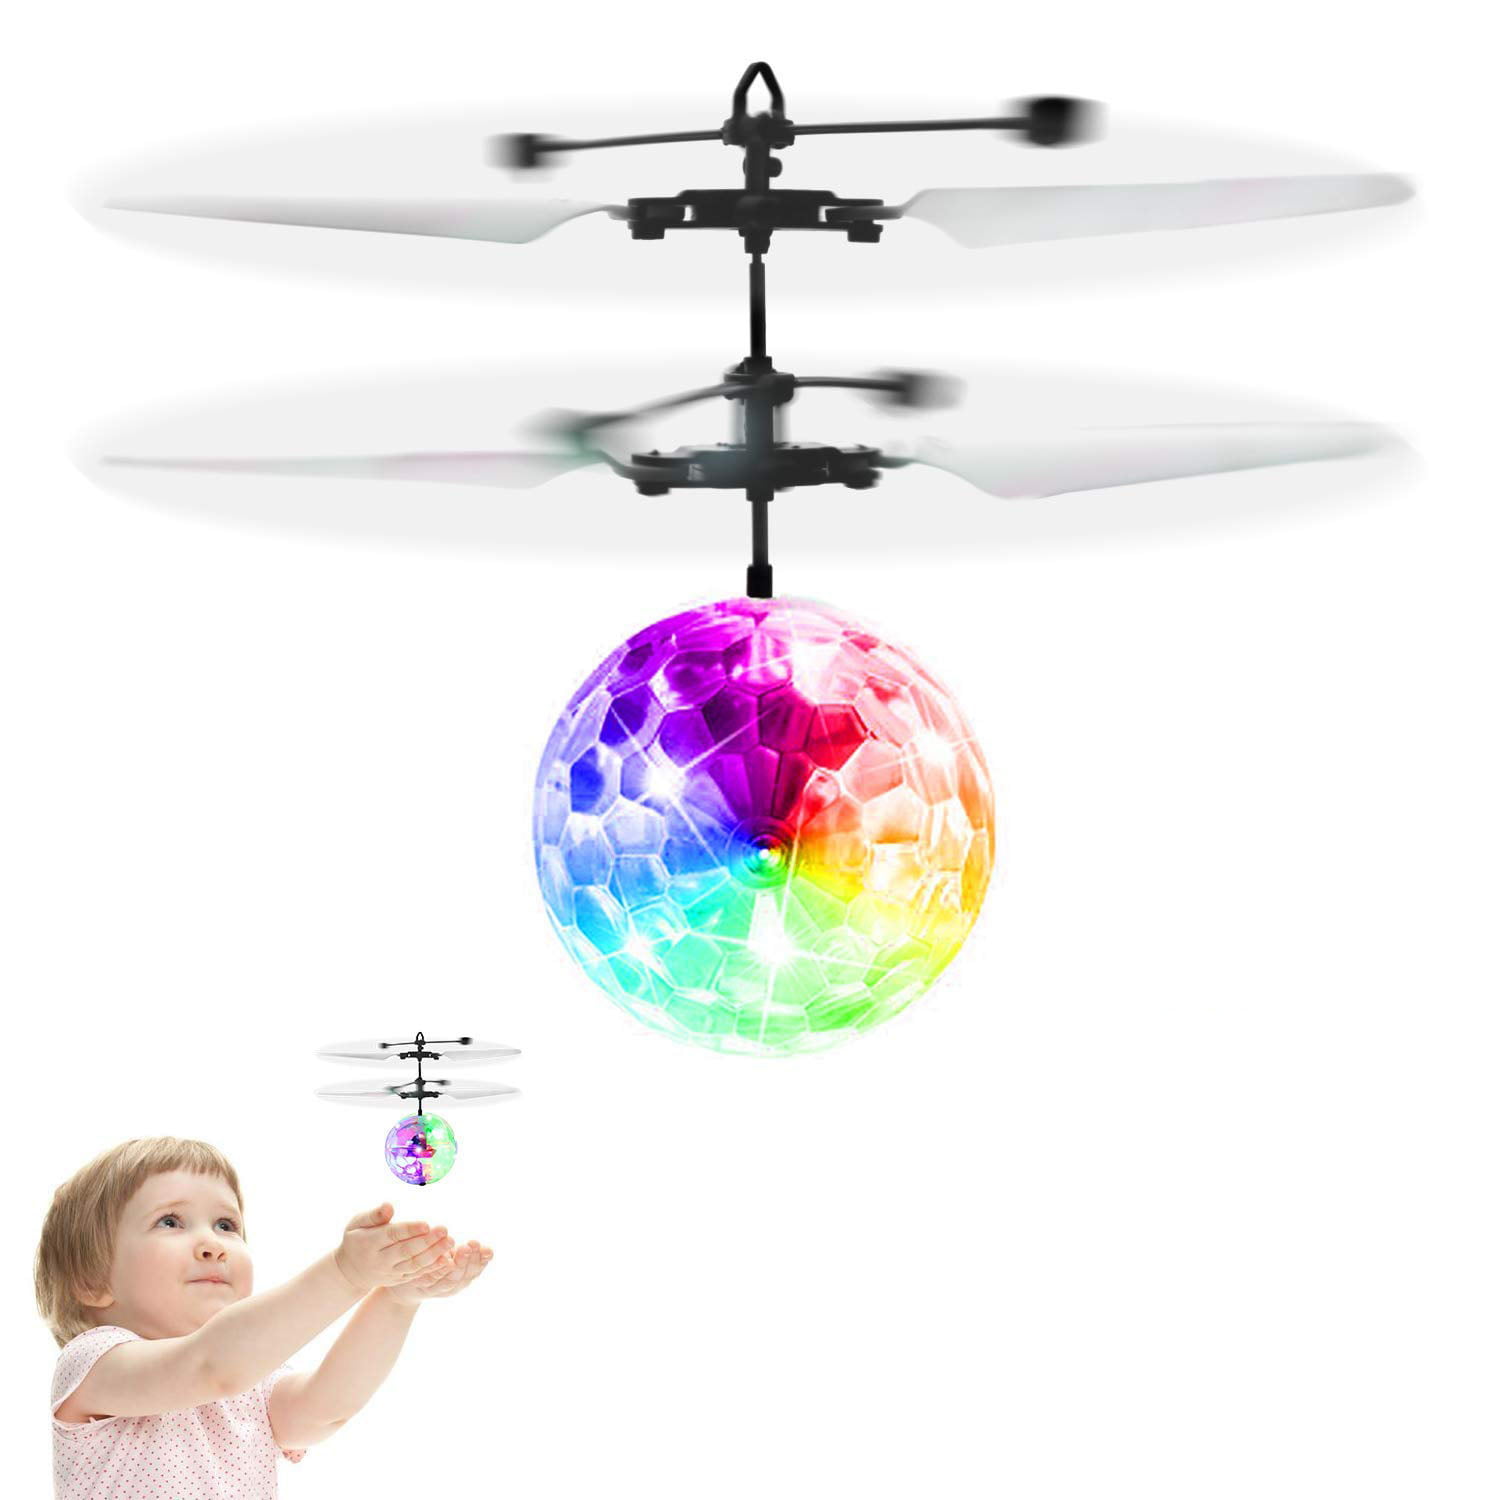 RC helicopter Drone kids toys Flying Ball Aircraft Led Flashing Light Up Toy 